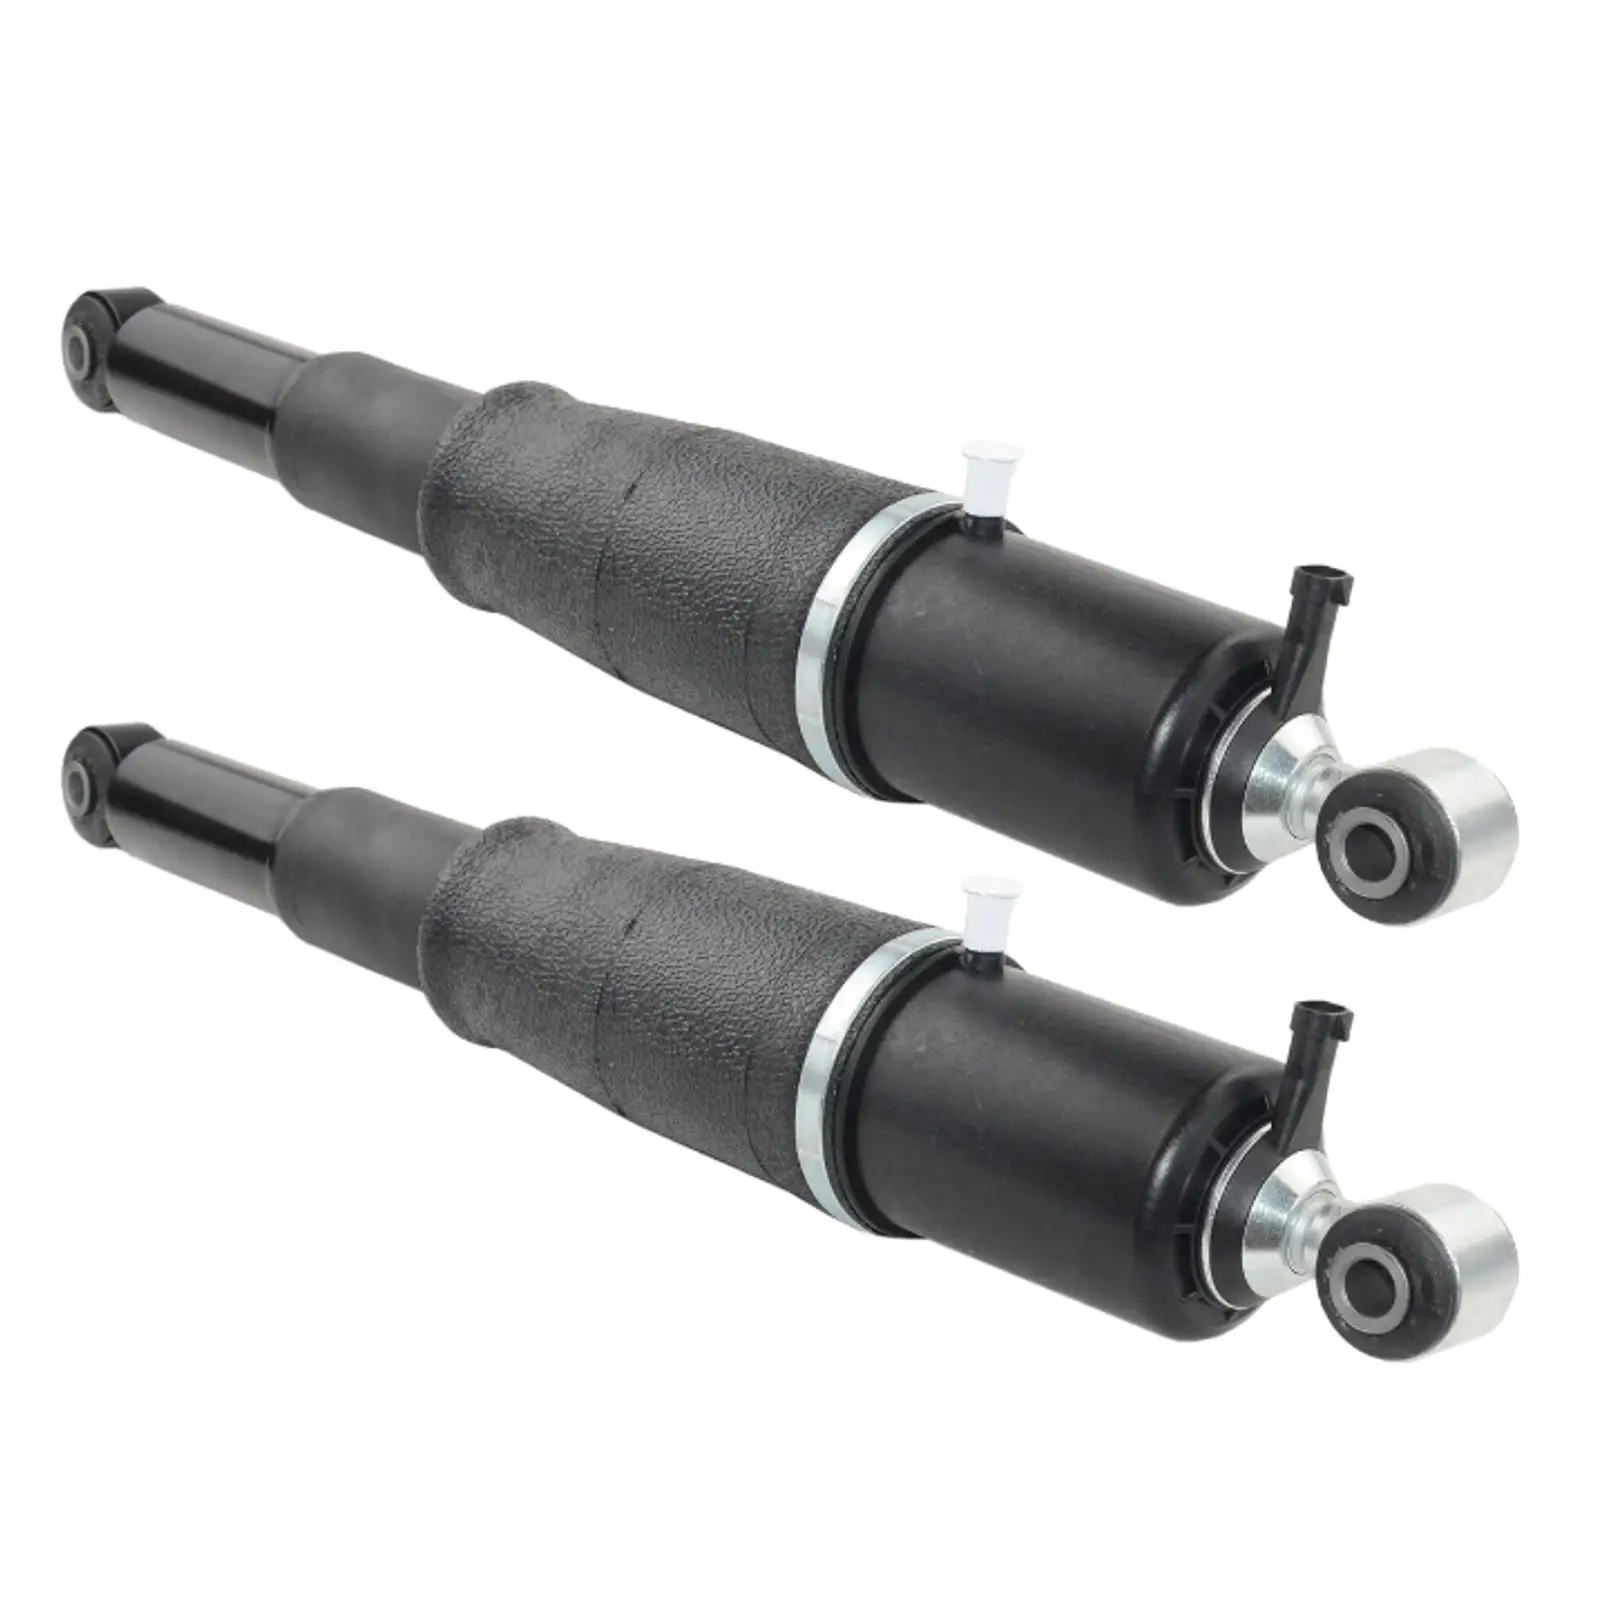 Rear Air Lift Shock Struts Shock Absorber Fits for Chevy Avalanche / 1500 02-13 22187156 25979391 19300070 25979394 AS-2127